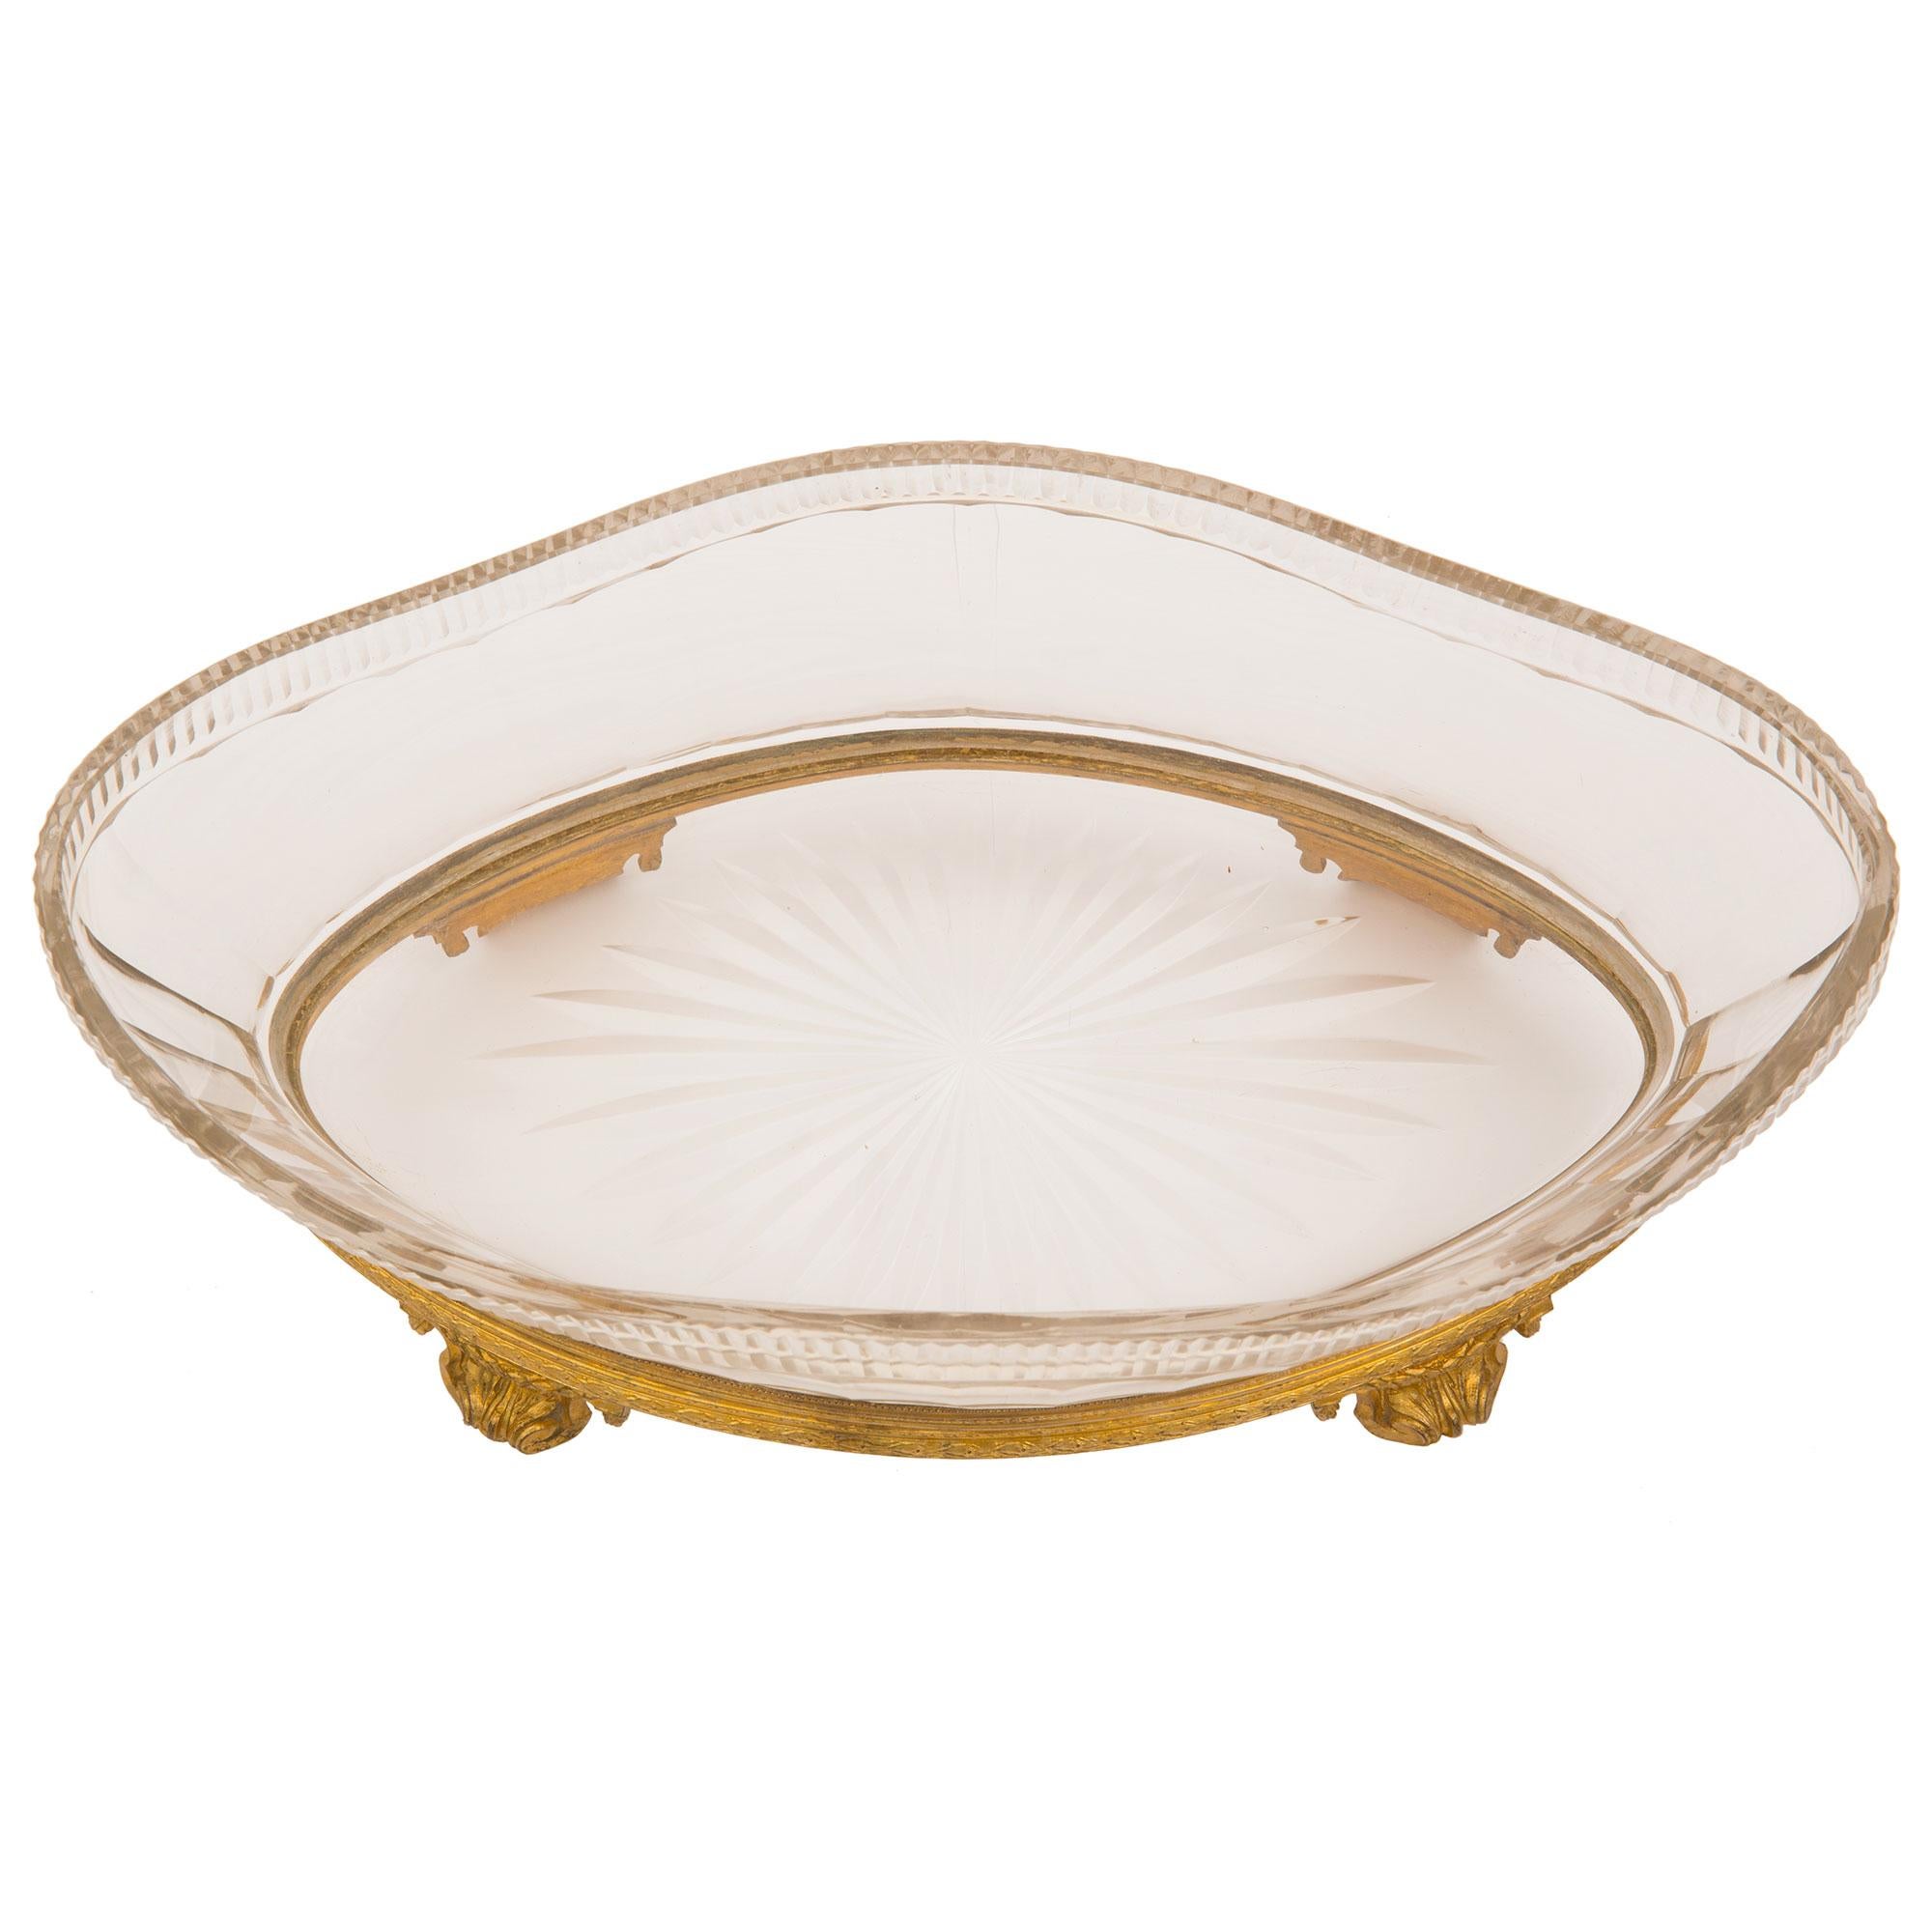 An exquisite French 19th century Louis XVI st. Baccarat crystal and ormolu oval shaped centerpiece bowl. The centerpiece is raised by elegant scrolled foliate supports with delicate swaging laurel garlands. A fine berried laurel garland wraps around